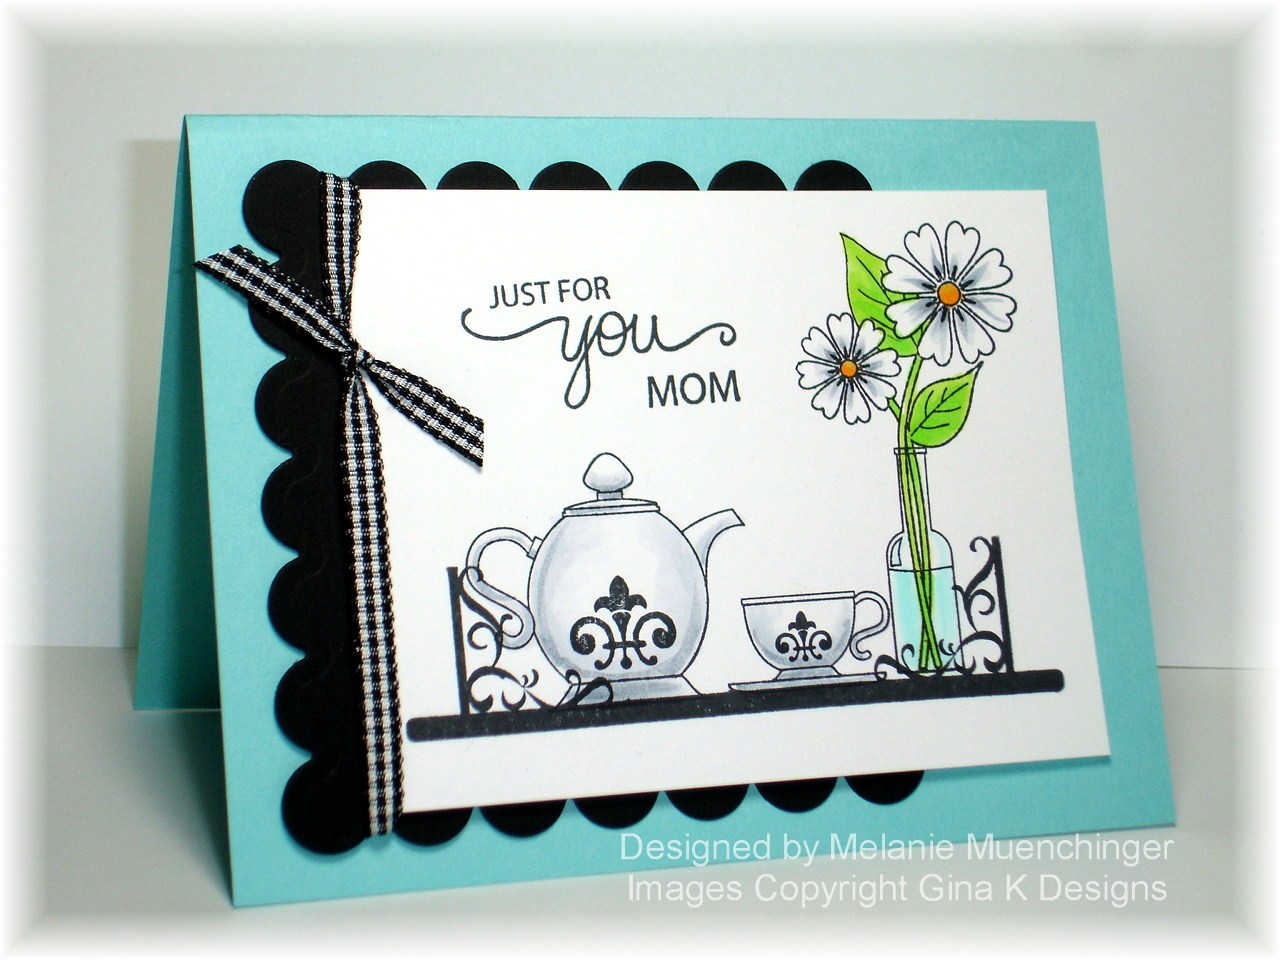 Gina K Designs - 8.5 x 11 Cardstock - Layering Weight - Ivory